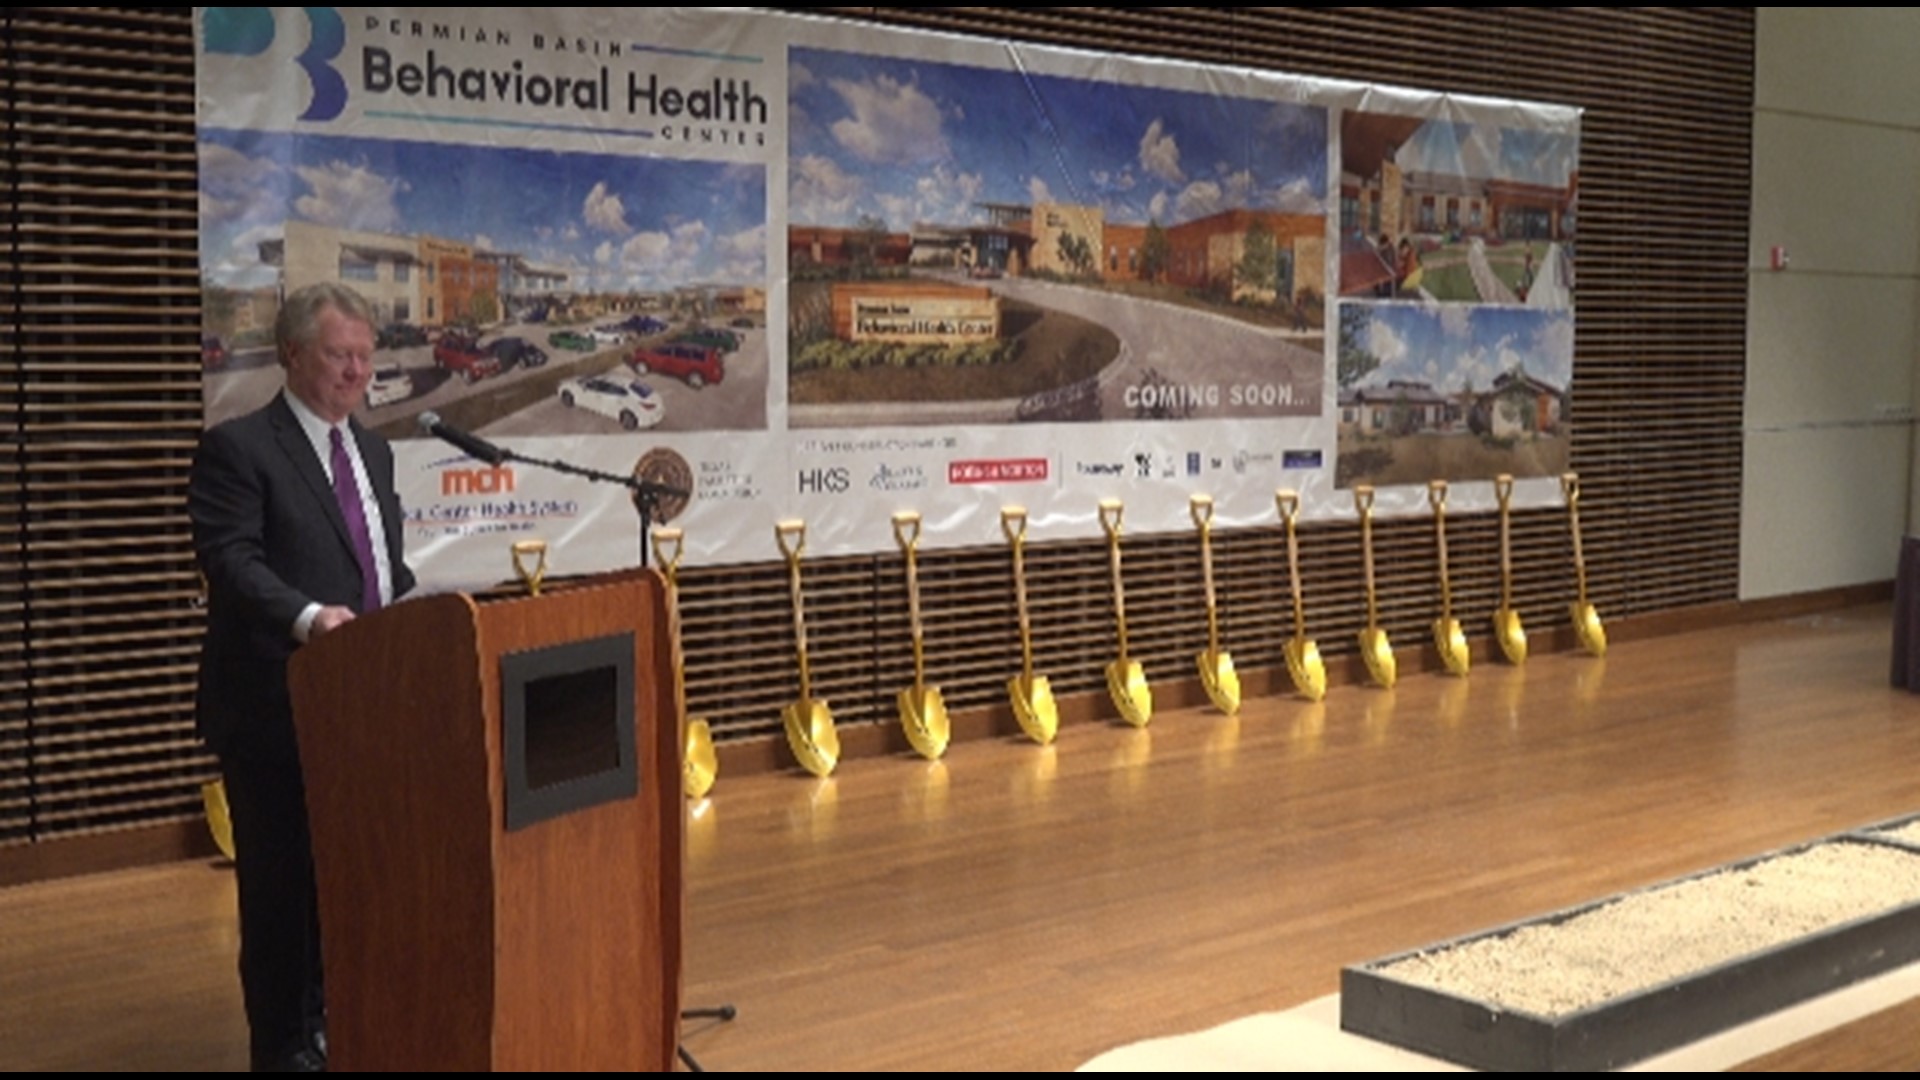 The mental health facility will be located between Midland and Odessa.